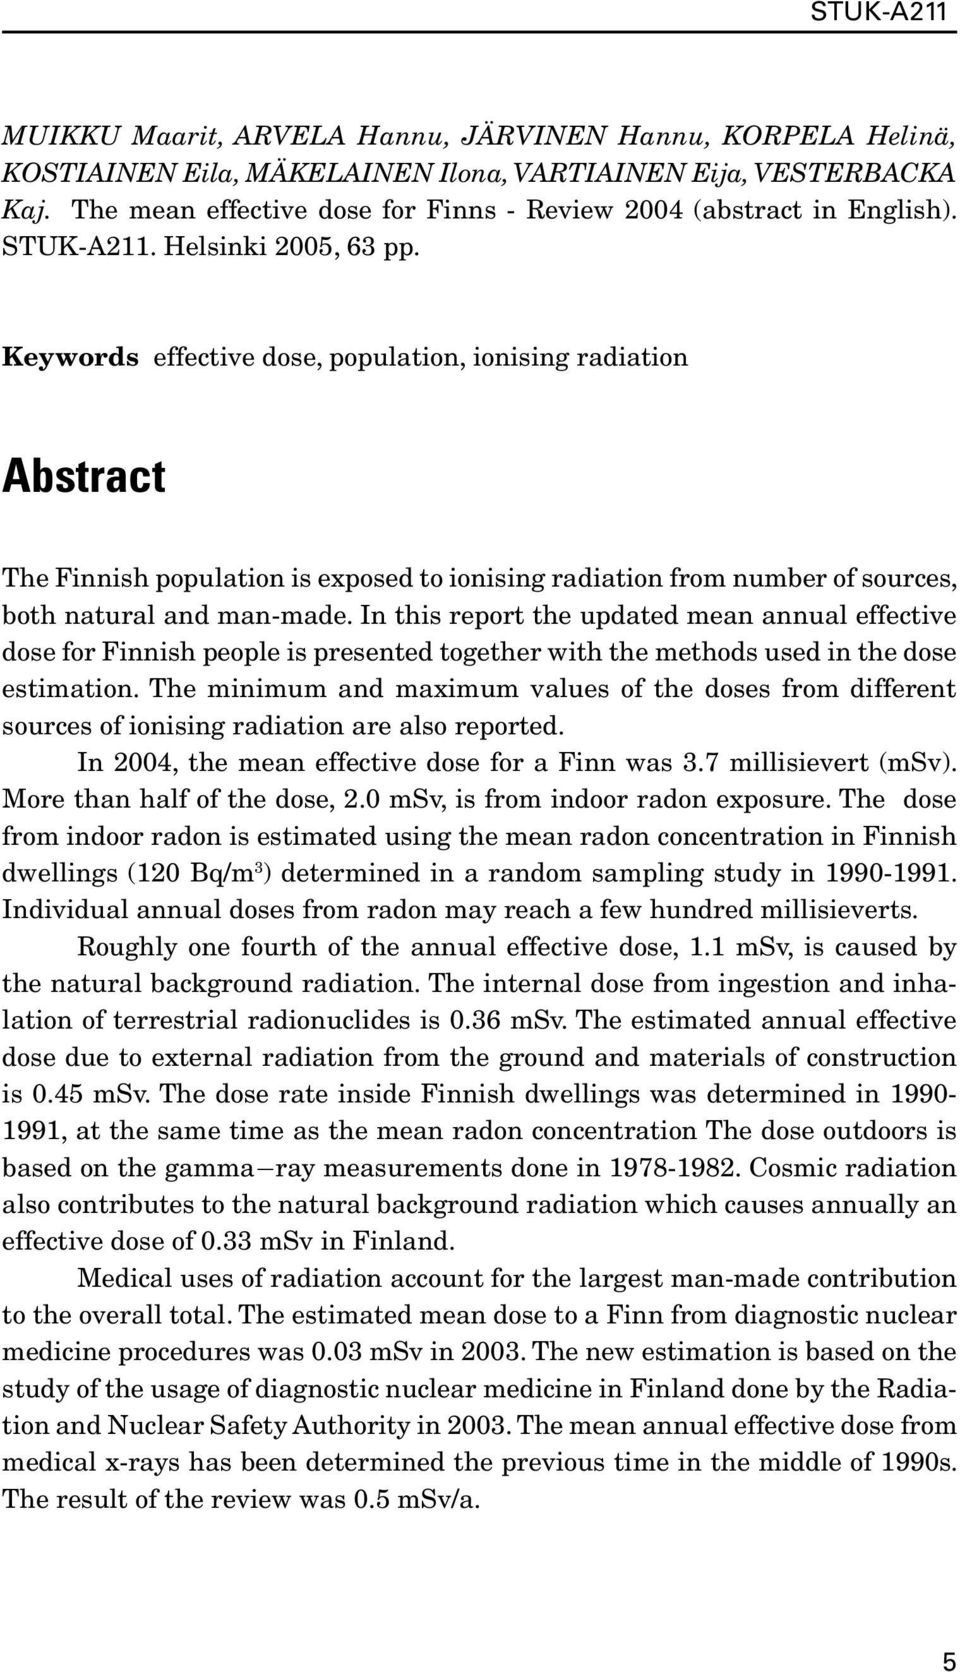 Keywords effective dose, population, ionising radiation Abstract The Finnish population is exposed to ionising radiation from number of sources, both natural and man-made.